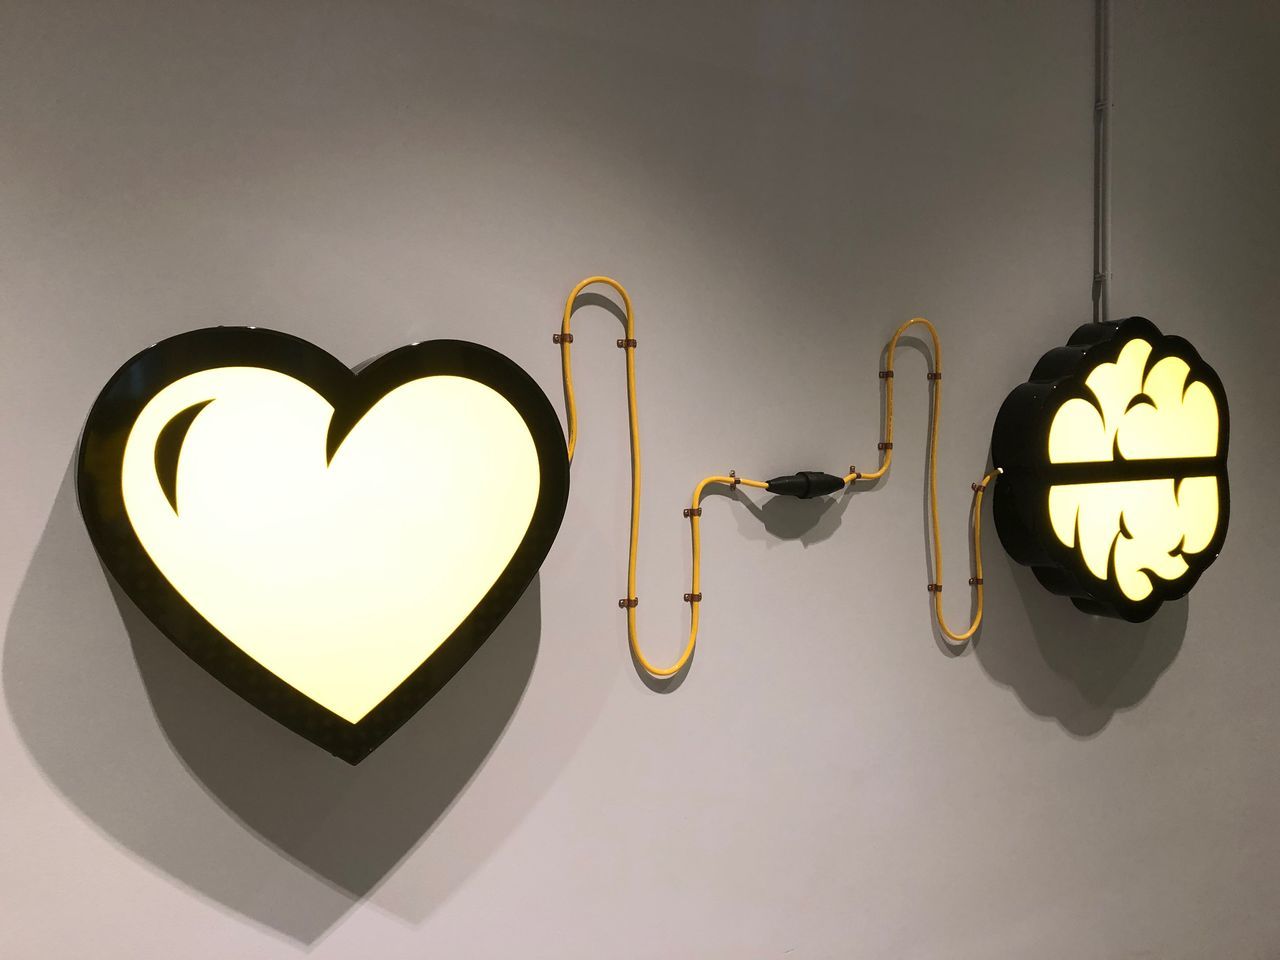 CLOSE-UP OF HEART SHAPE DECORATION HANGING ON CEILING